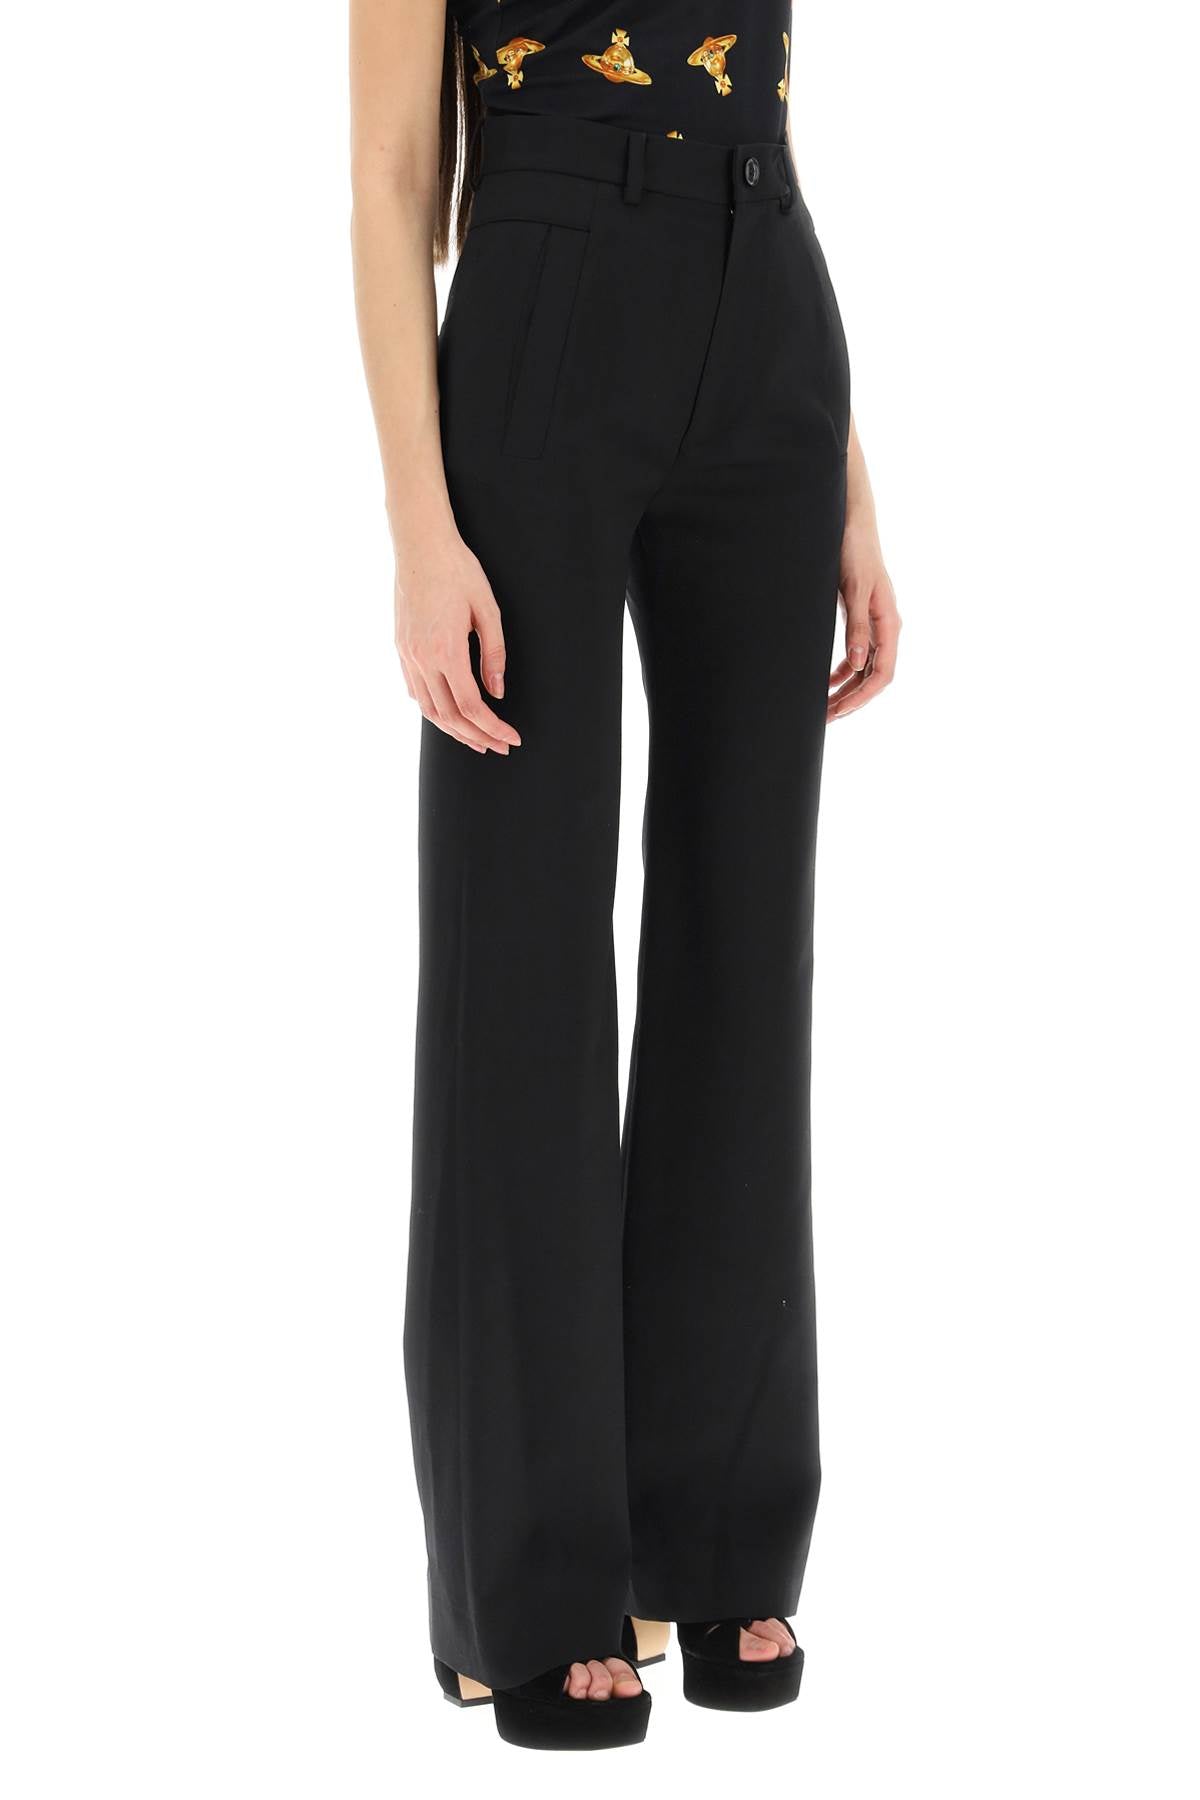 VIVIENNE WESTWOOD Black Wool Serge Trousers for Women - Full-Length and High-Waisted